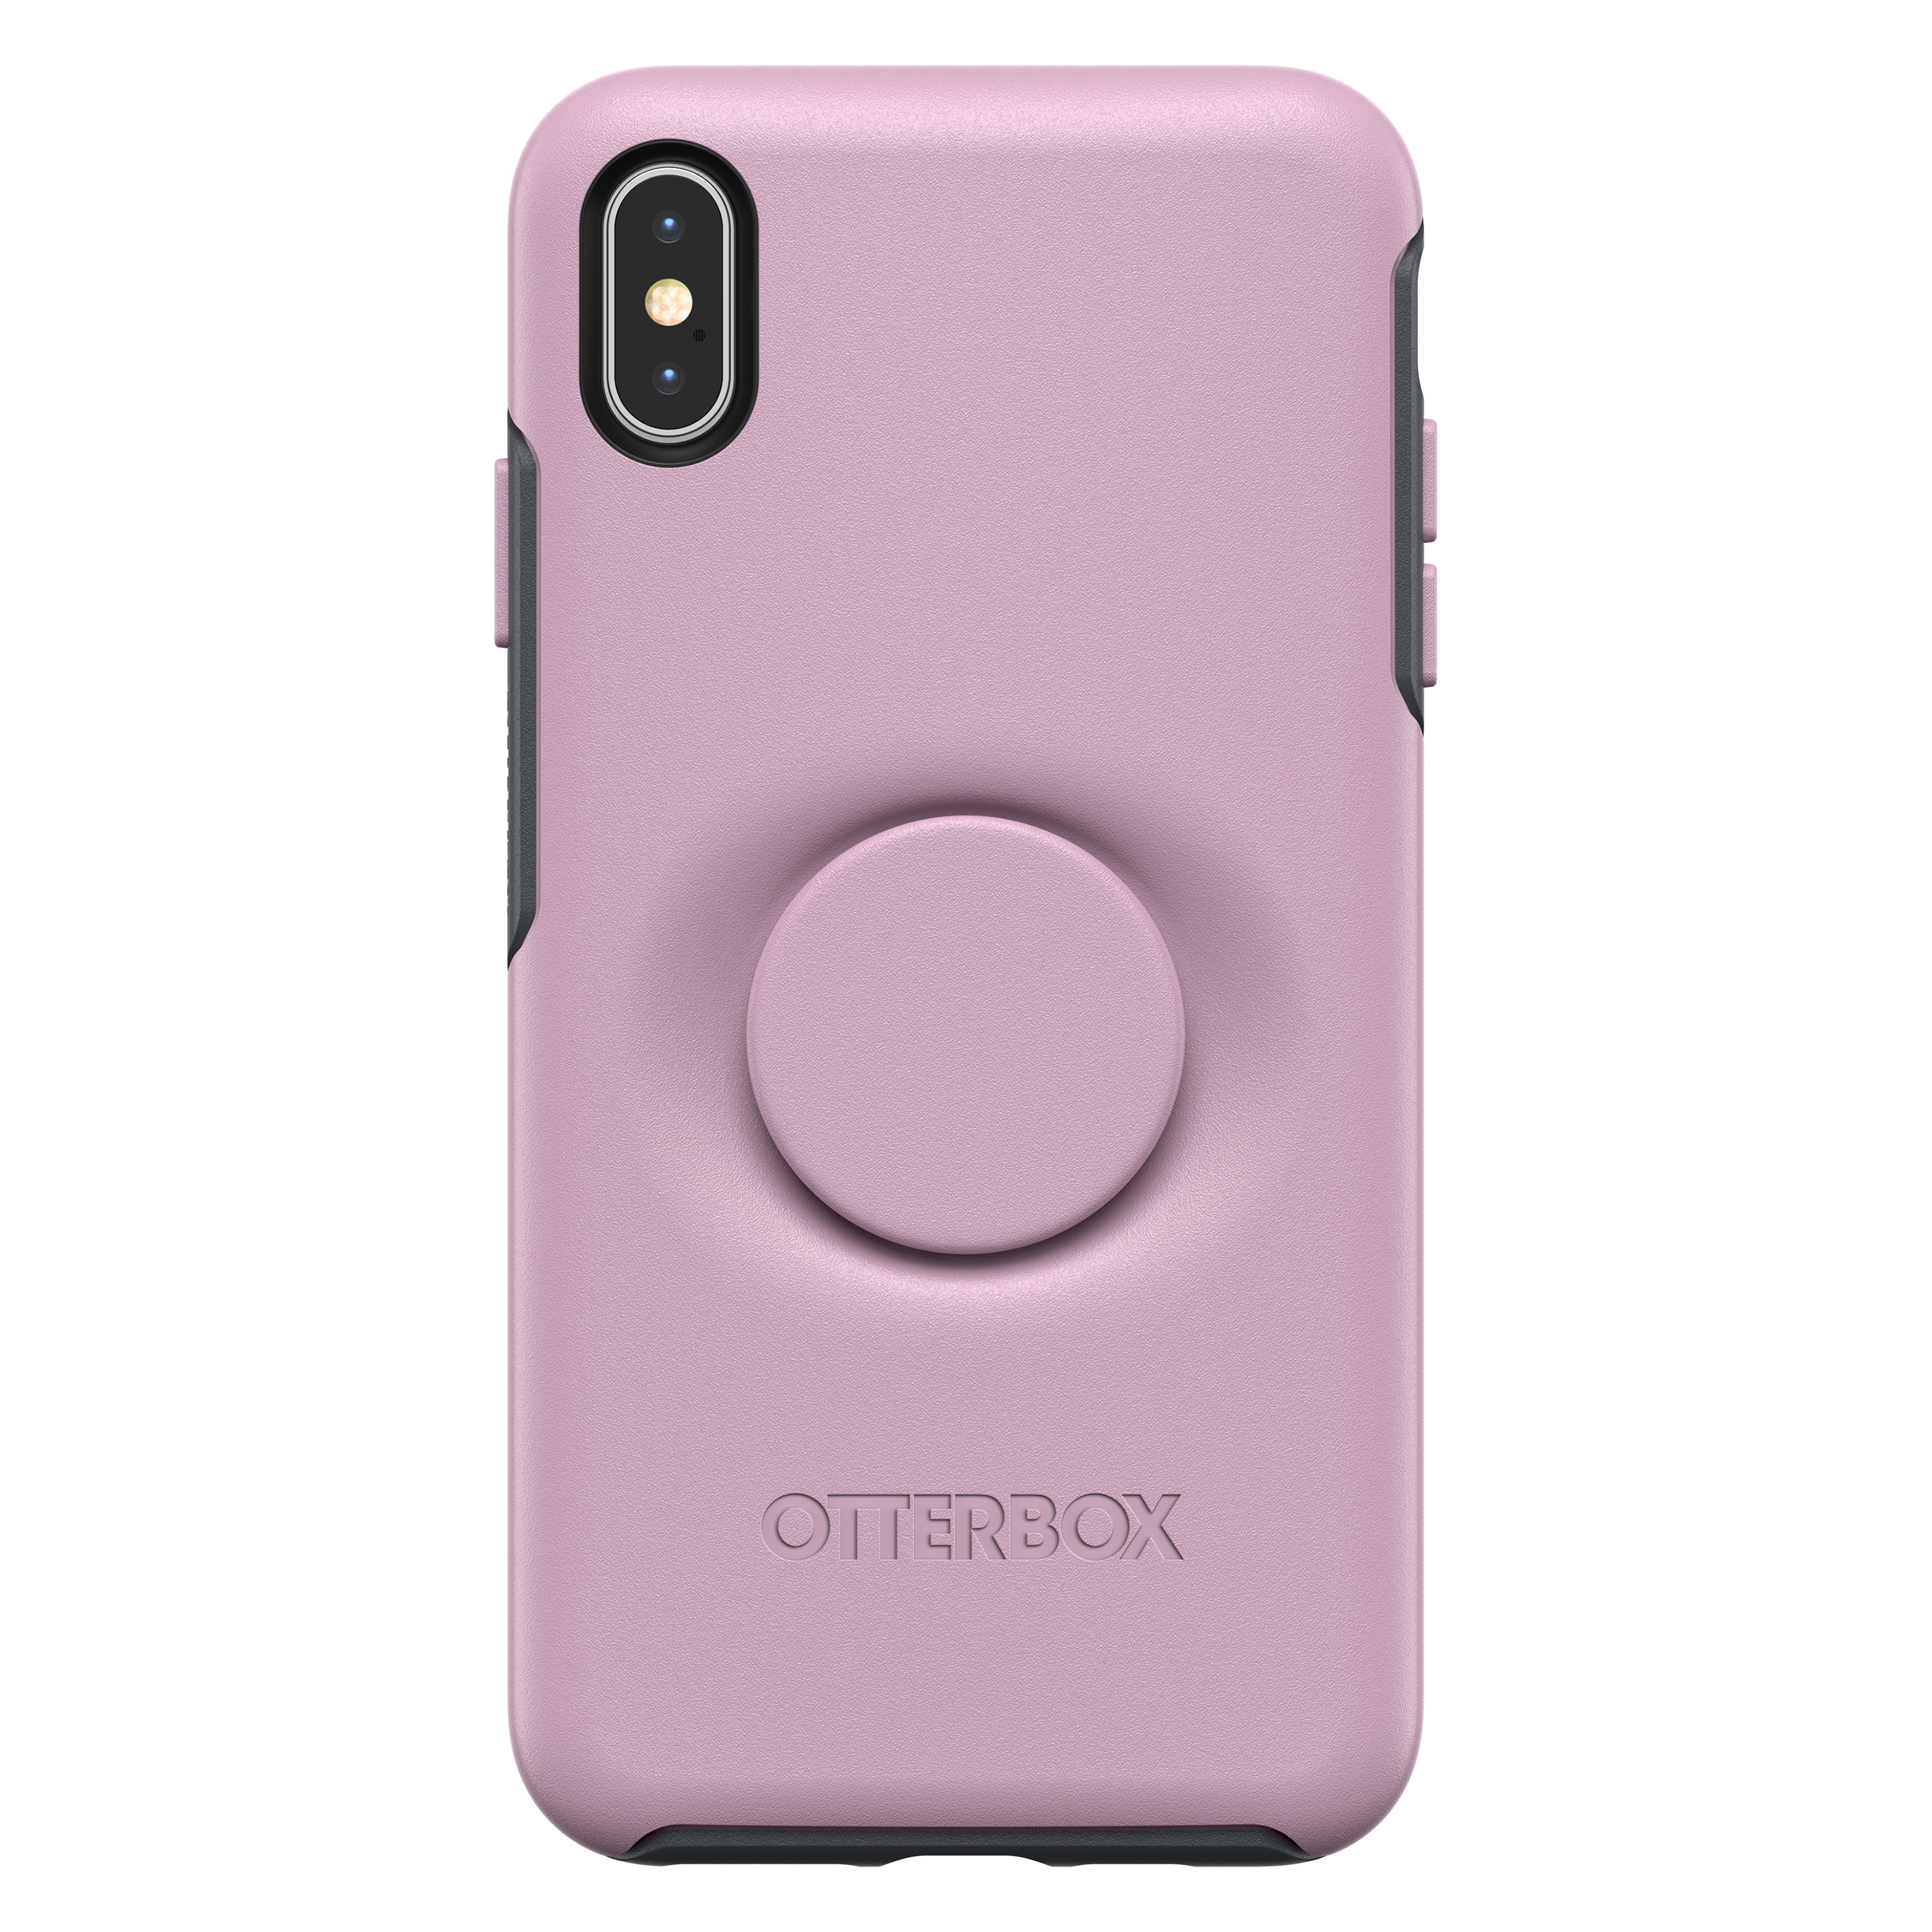 Symmetry, Apple, Pink Otter + OTTERBOX Max, XS Backcover, Pop iPhone